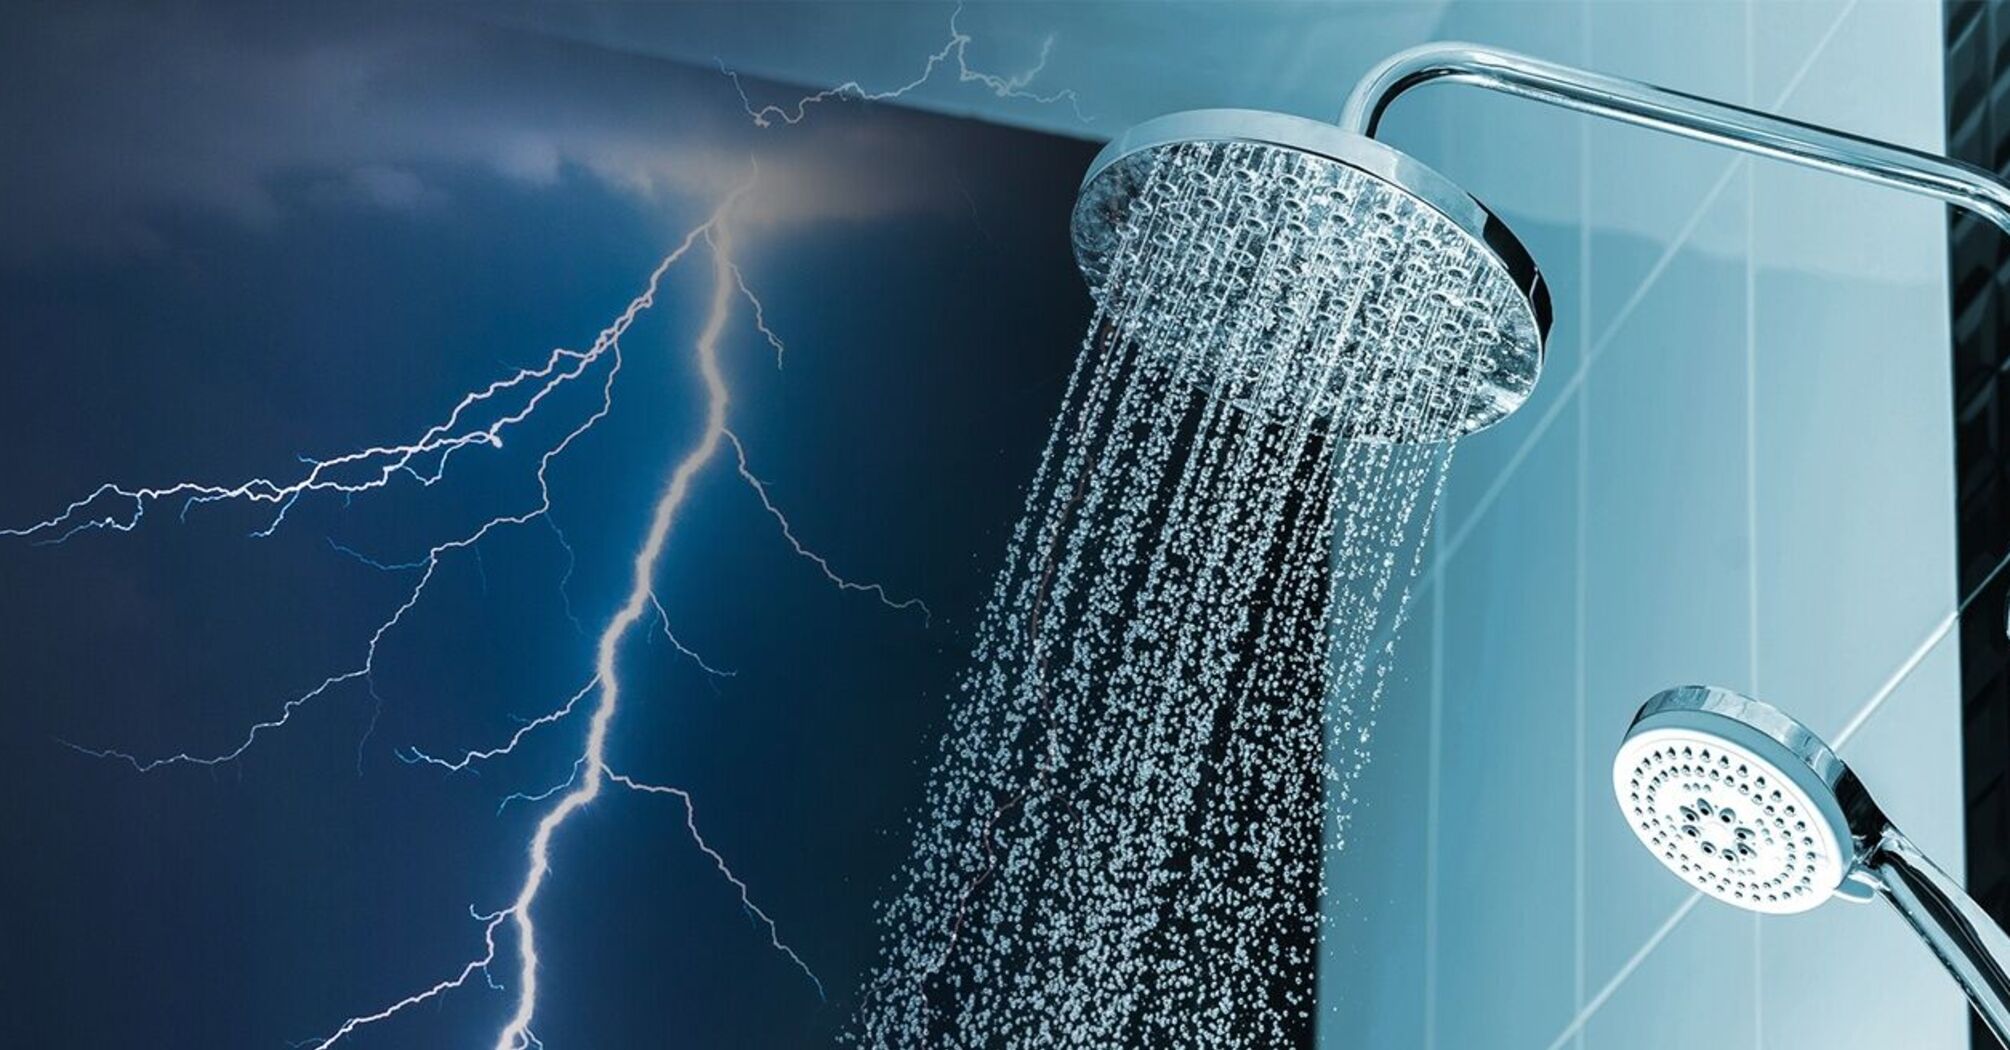 Is it safe to take a shower during a thunderstorm